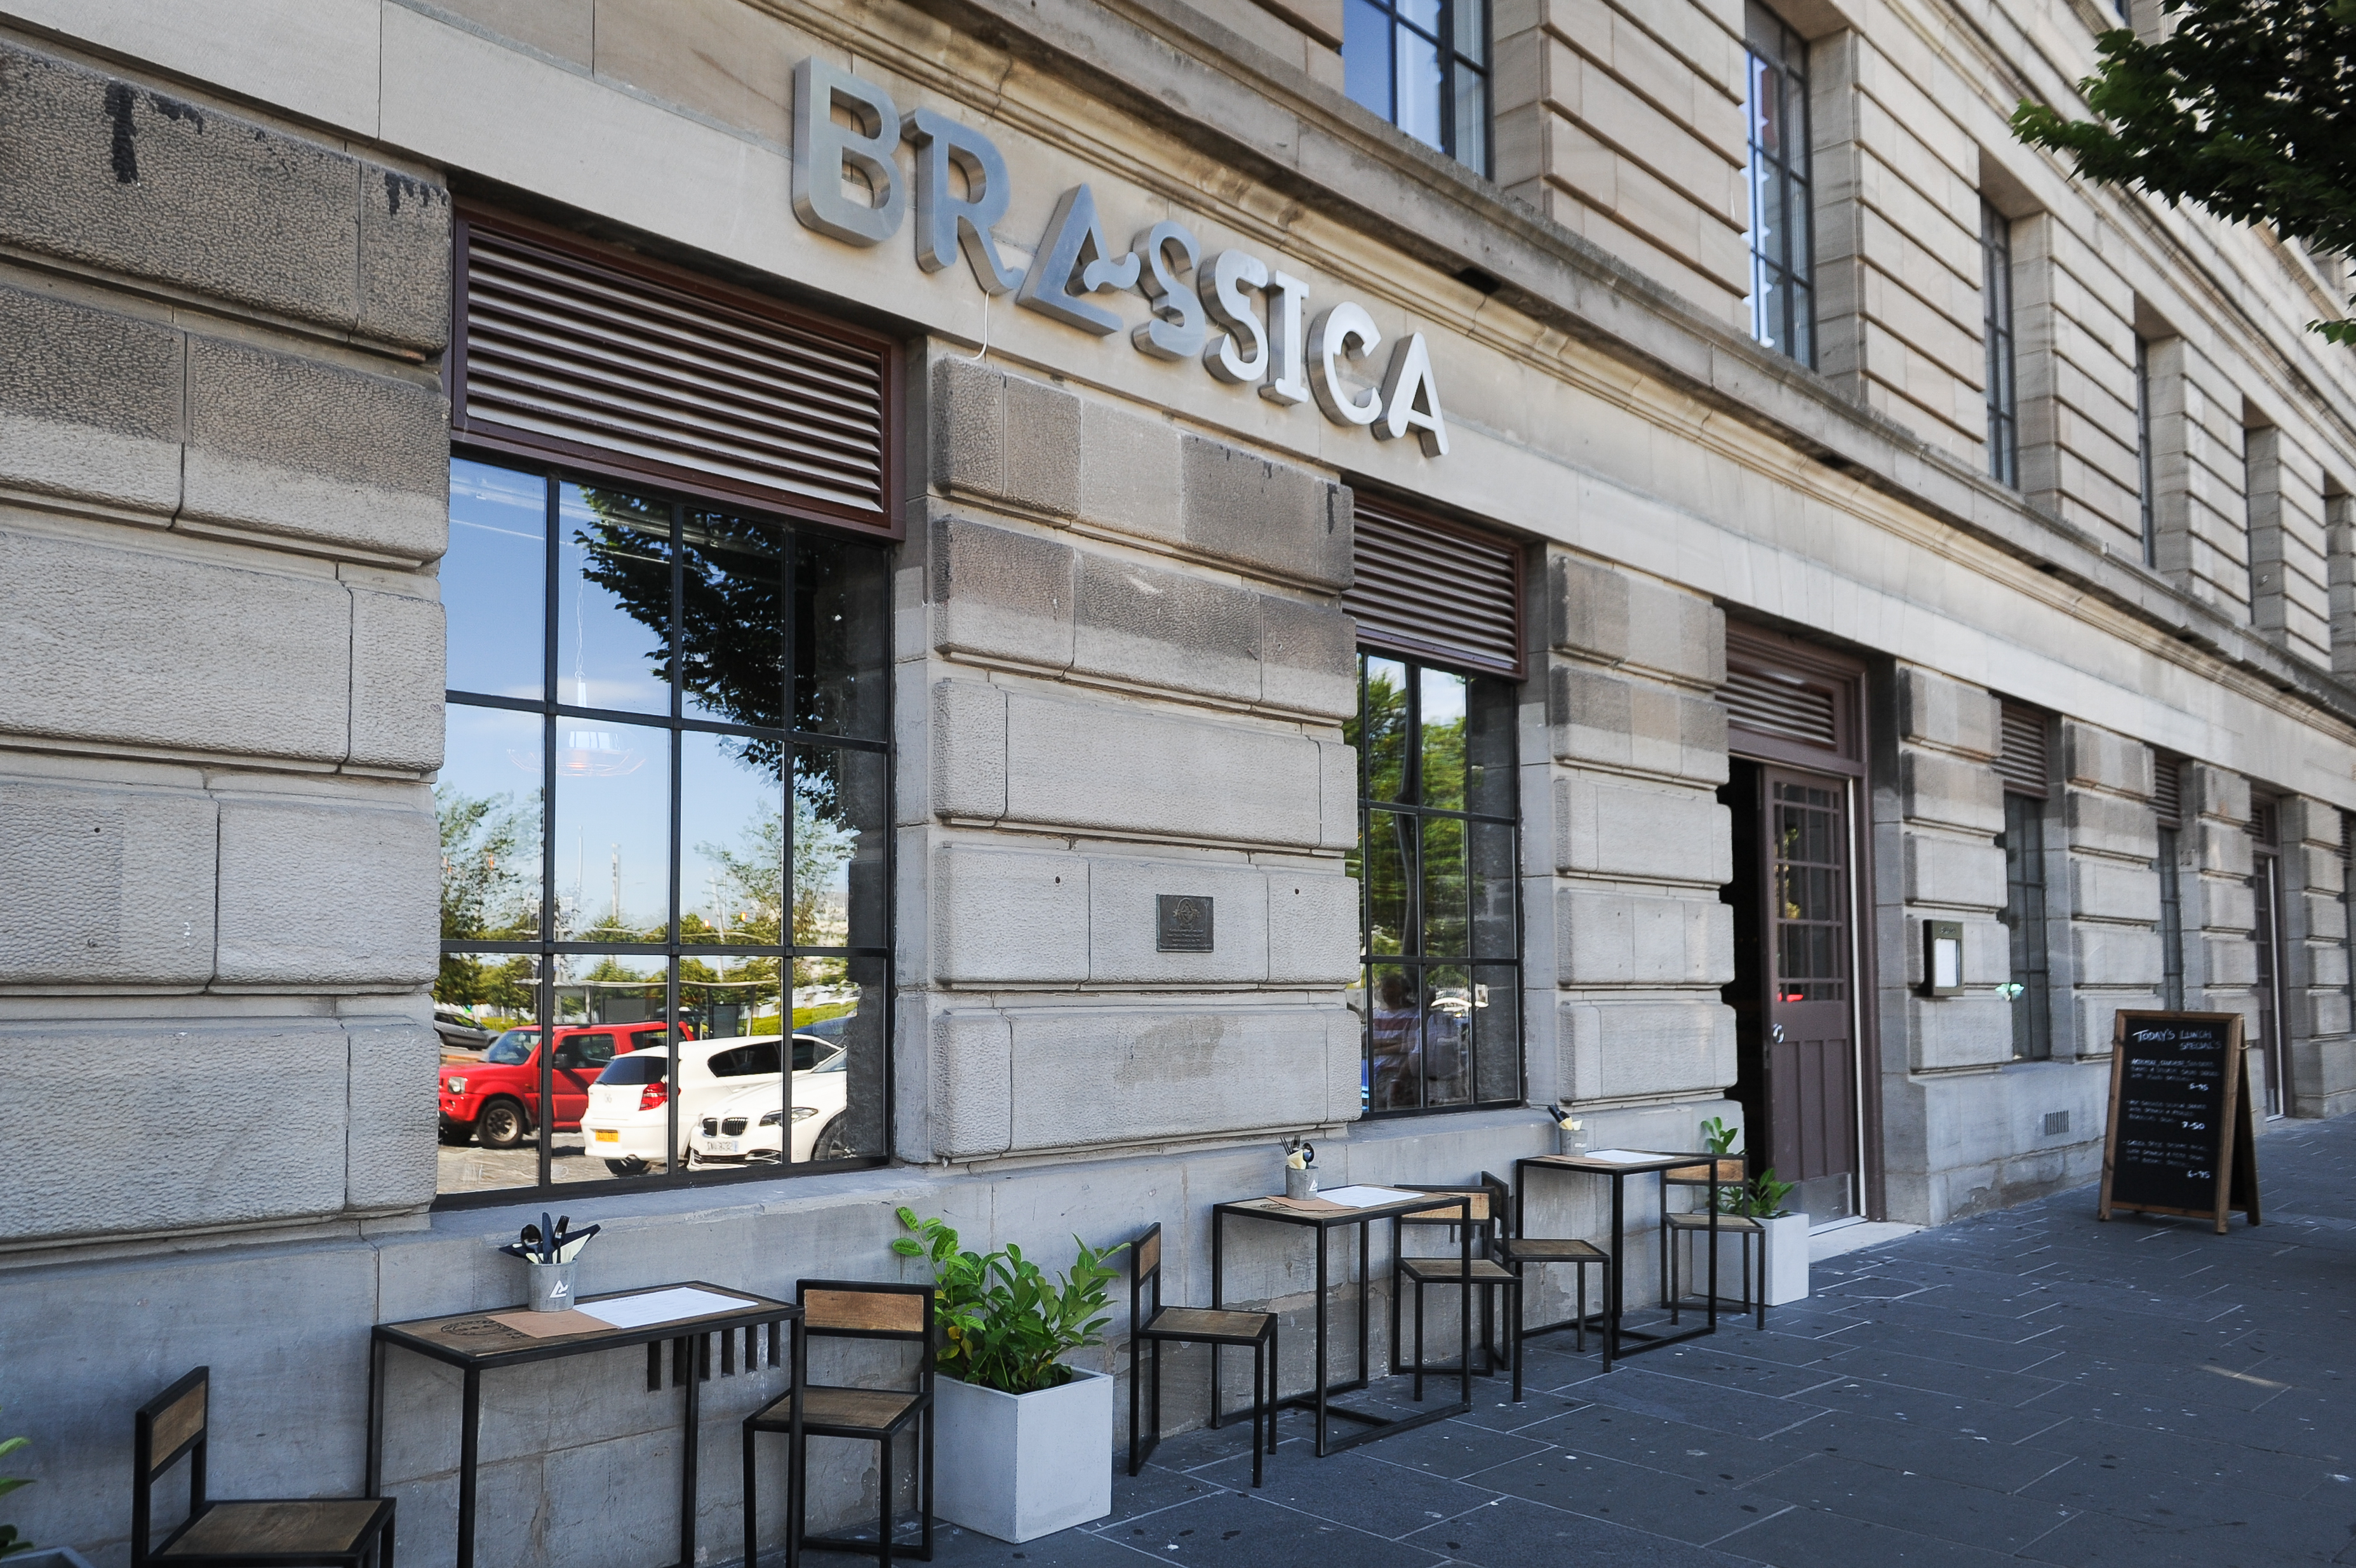 Brassica, which opened in June last year, shut suddenly in October